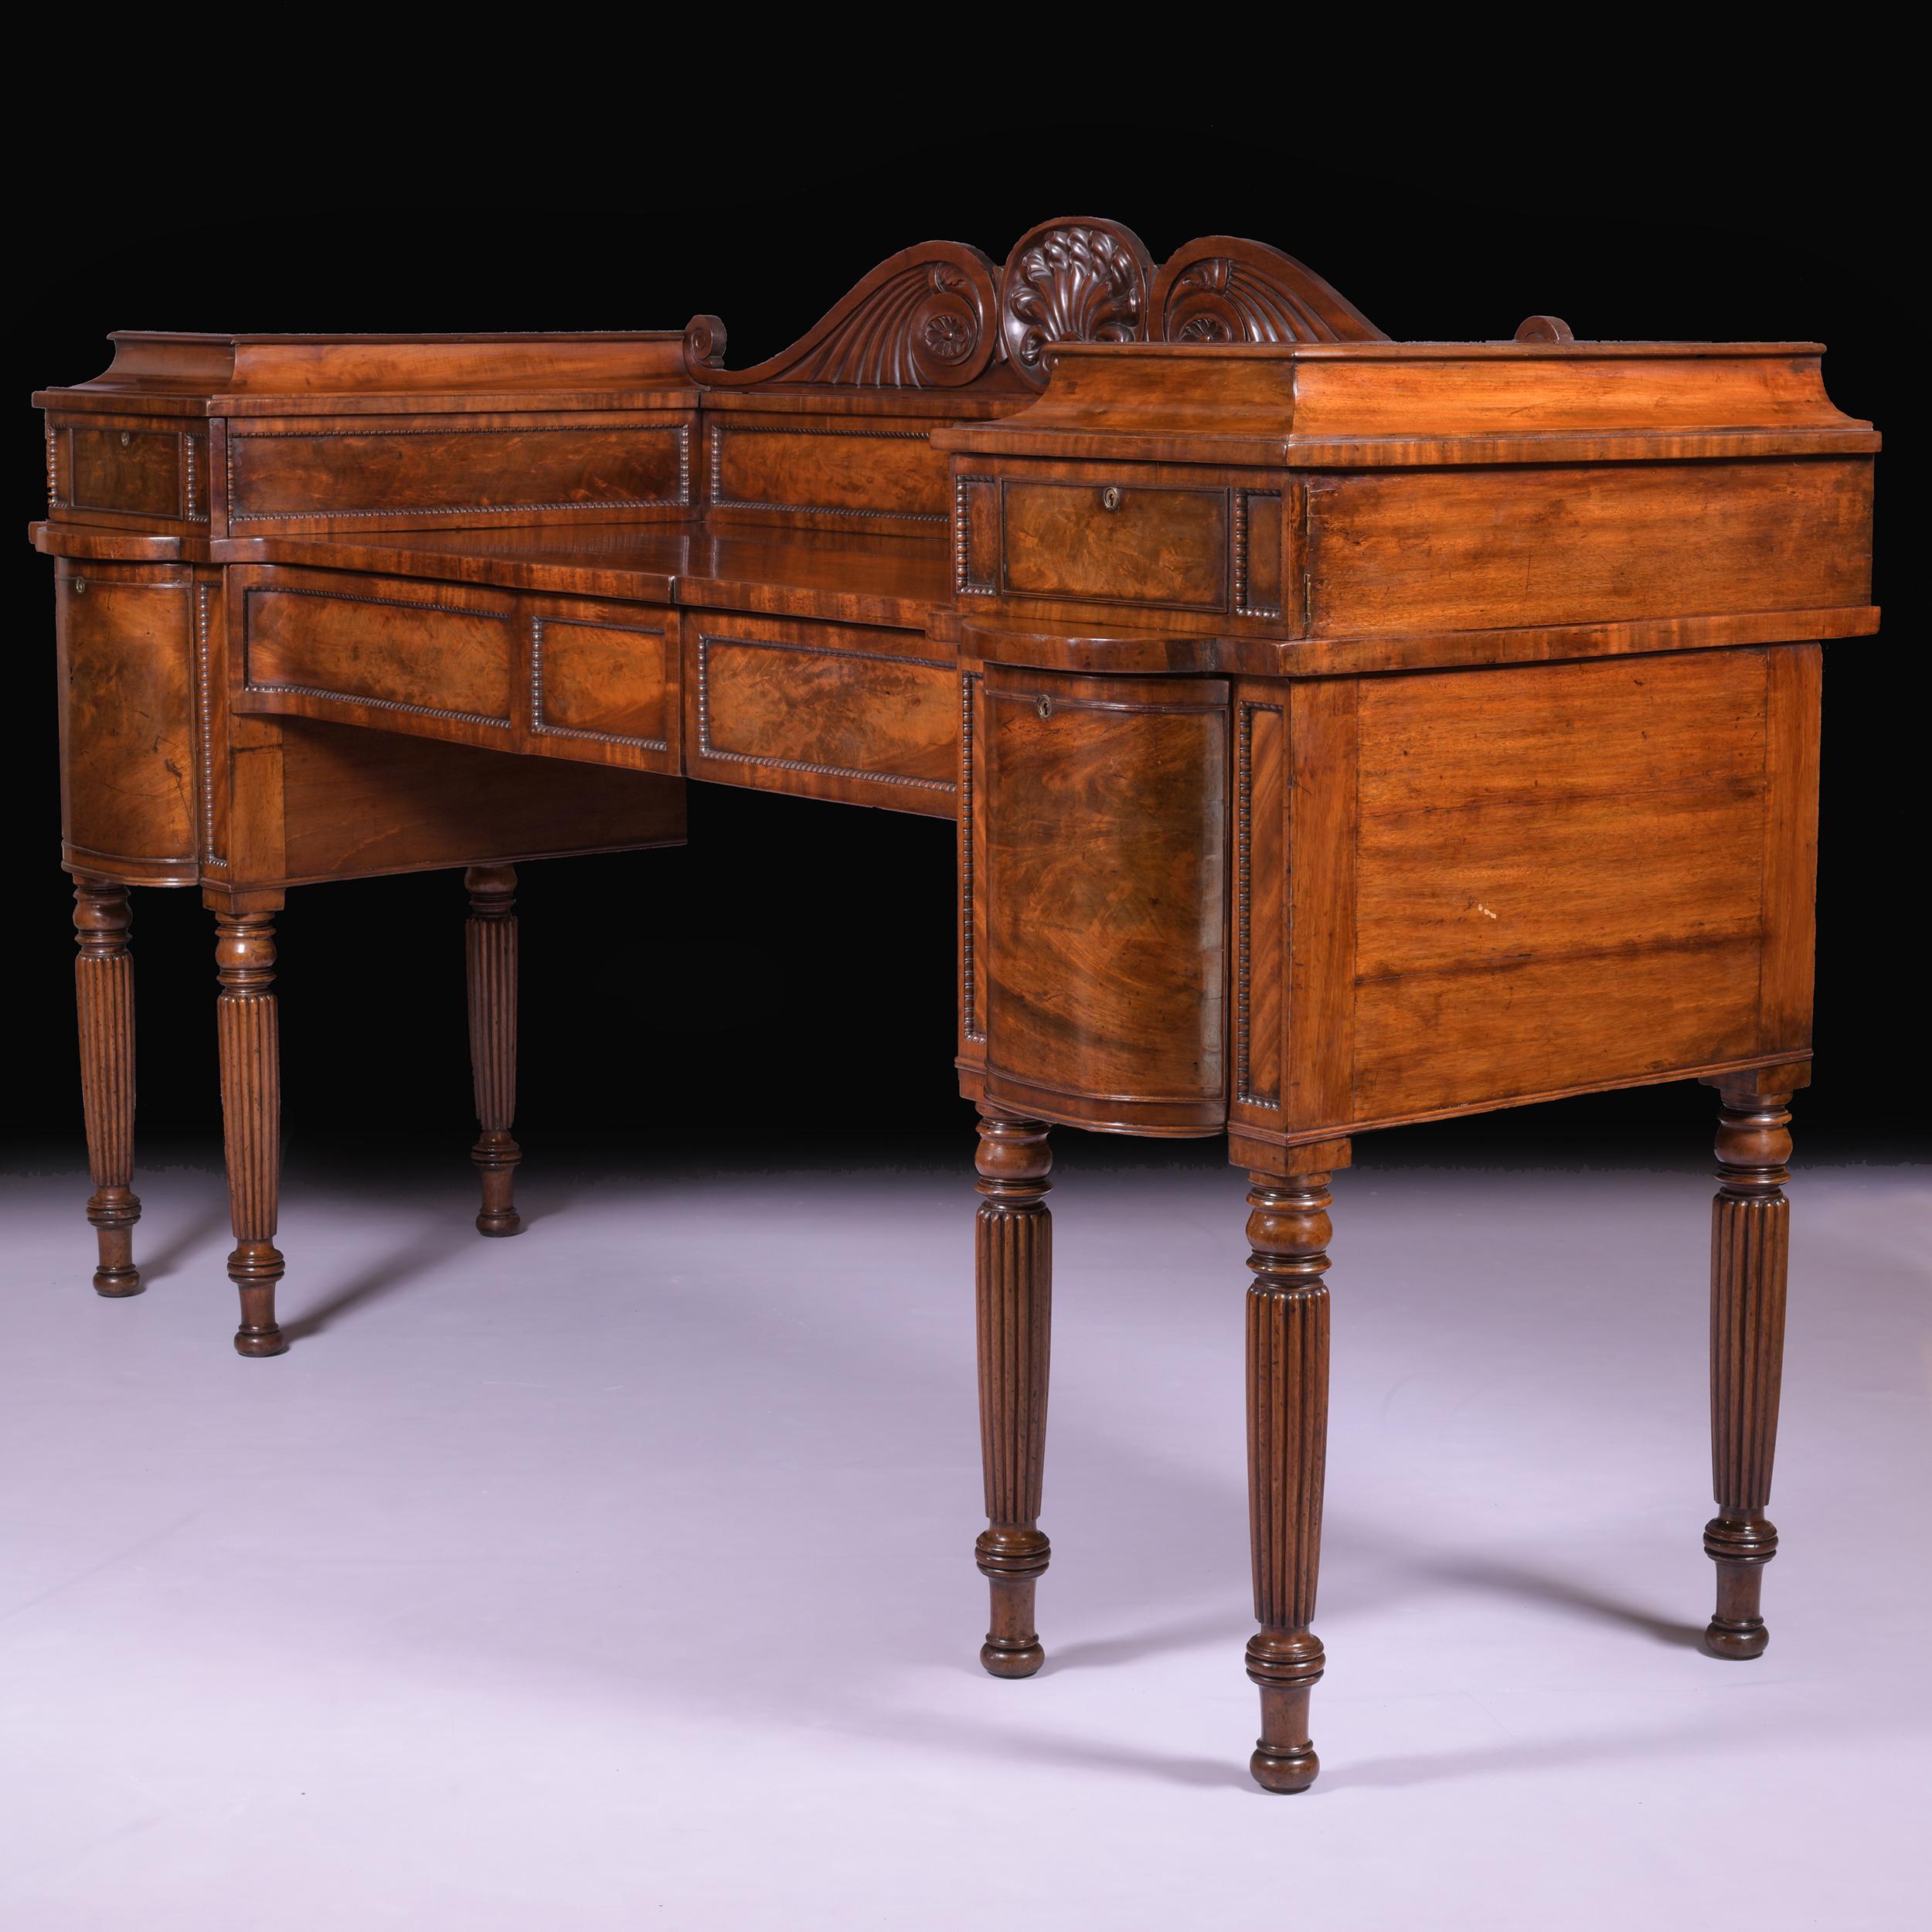 A very fine early 19th century English Regency figured mahogany sideboard in the manner of Gillows of Lancaster, featuring a scrolled pediment above a moulded and staged platform top each with opening doors in the form of drawers. The base with two